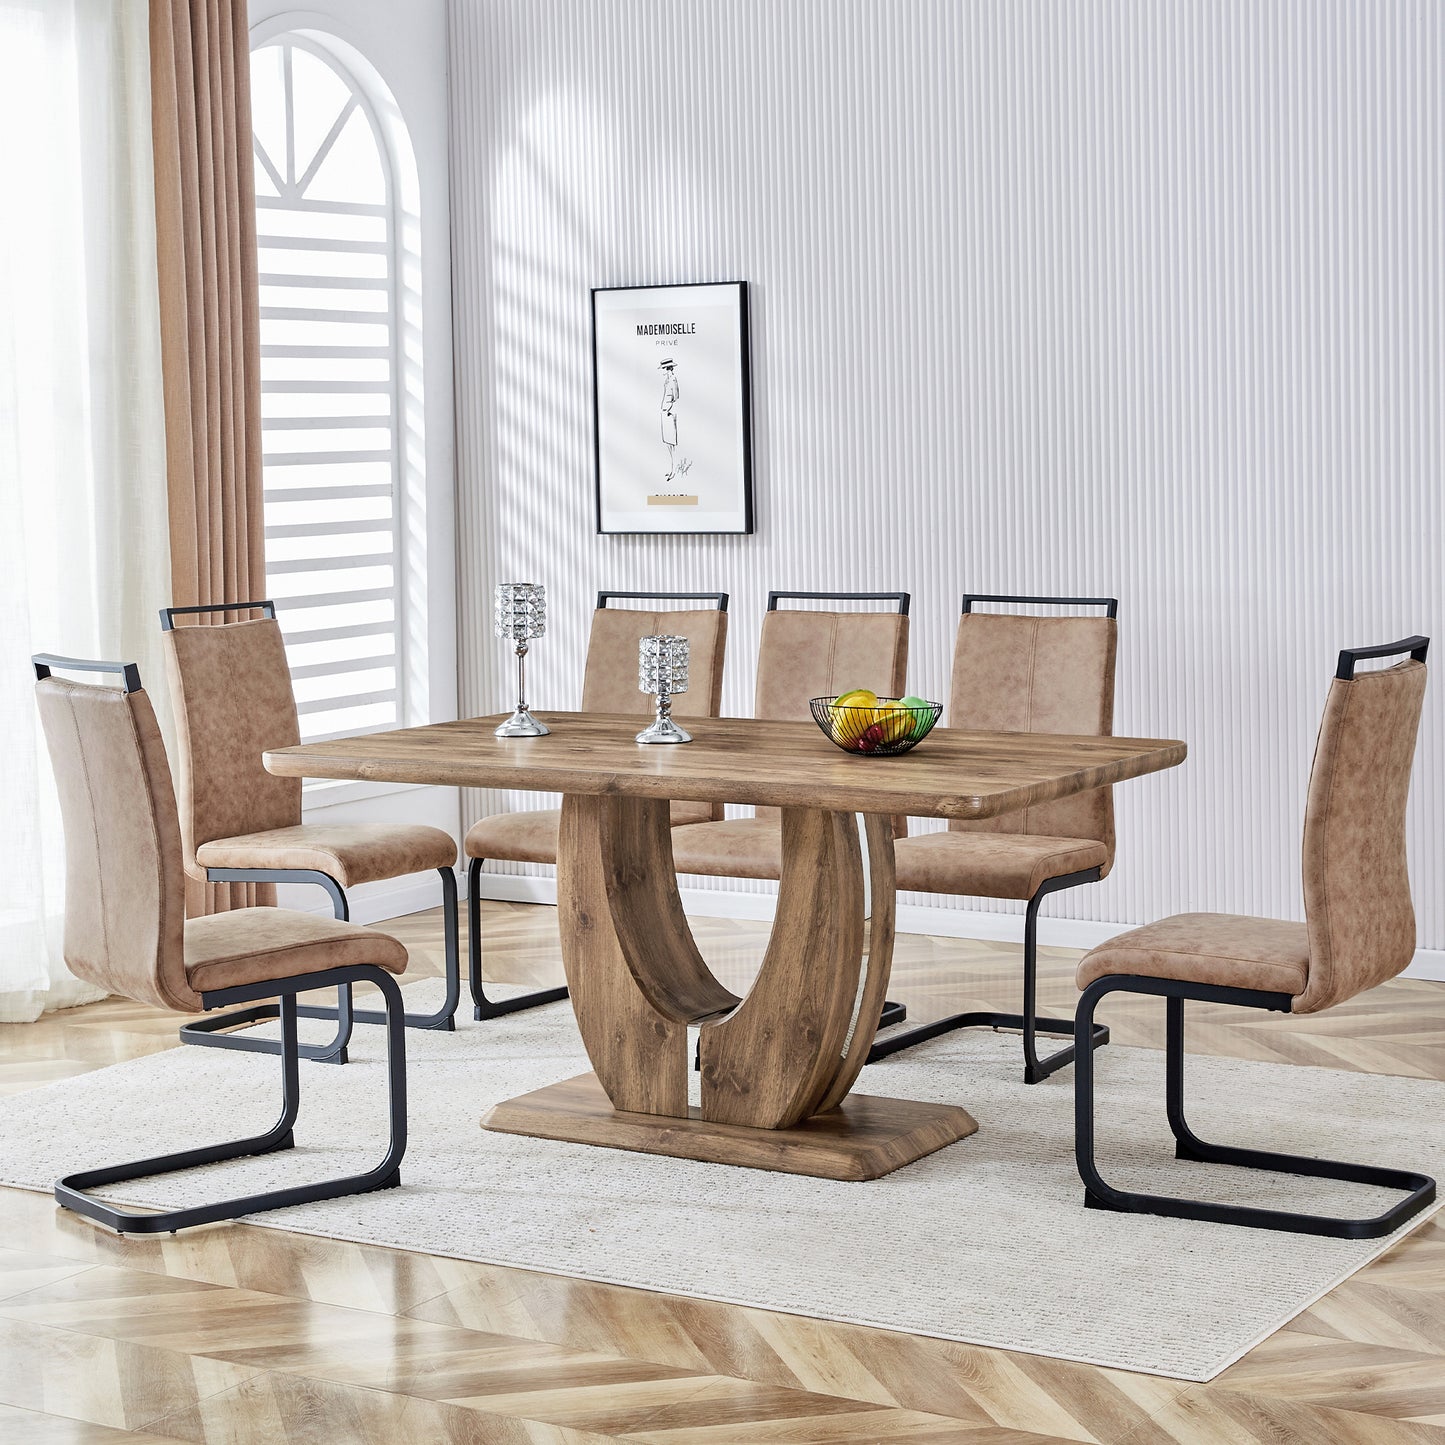 Luxurious 7-Piece Contemporary Dining Room Table and Chairs Set